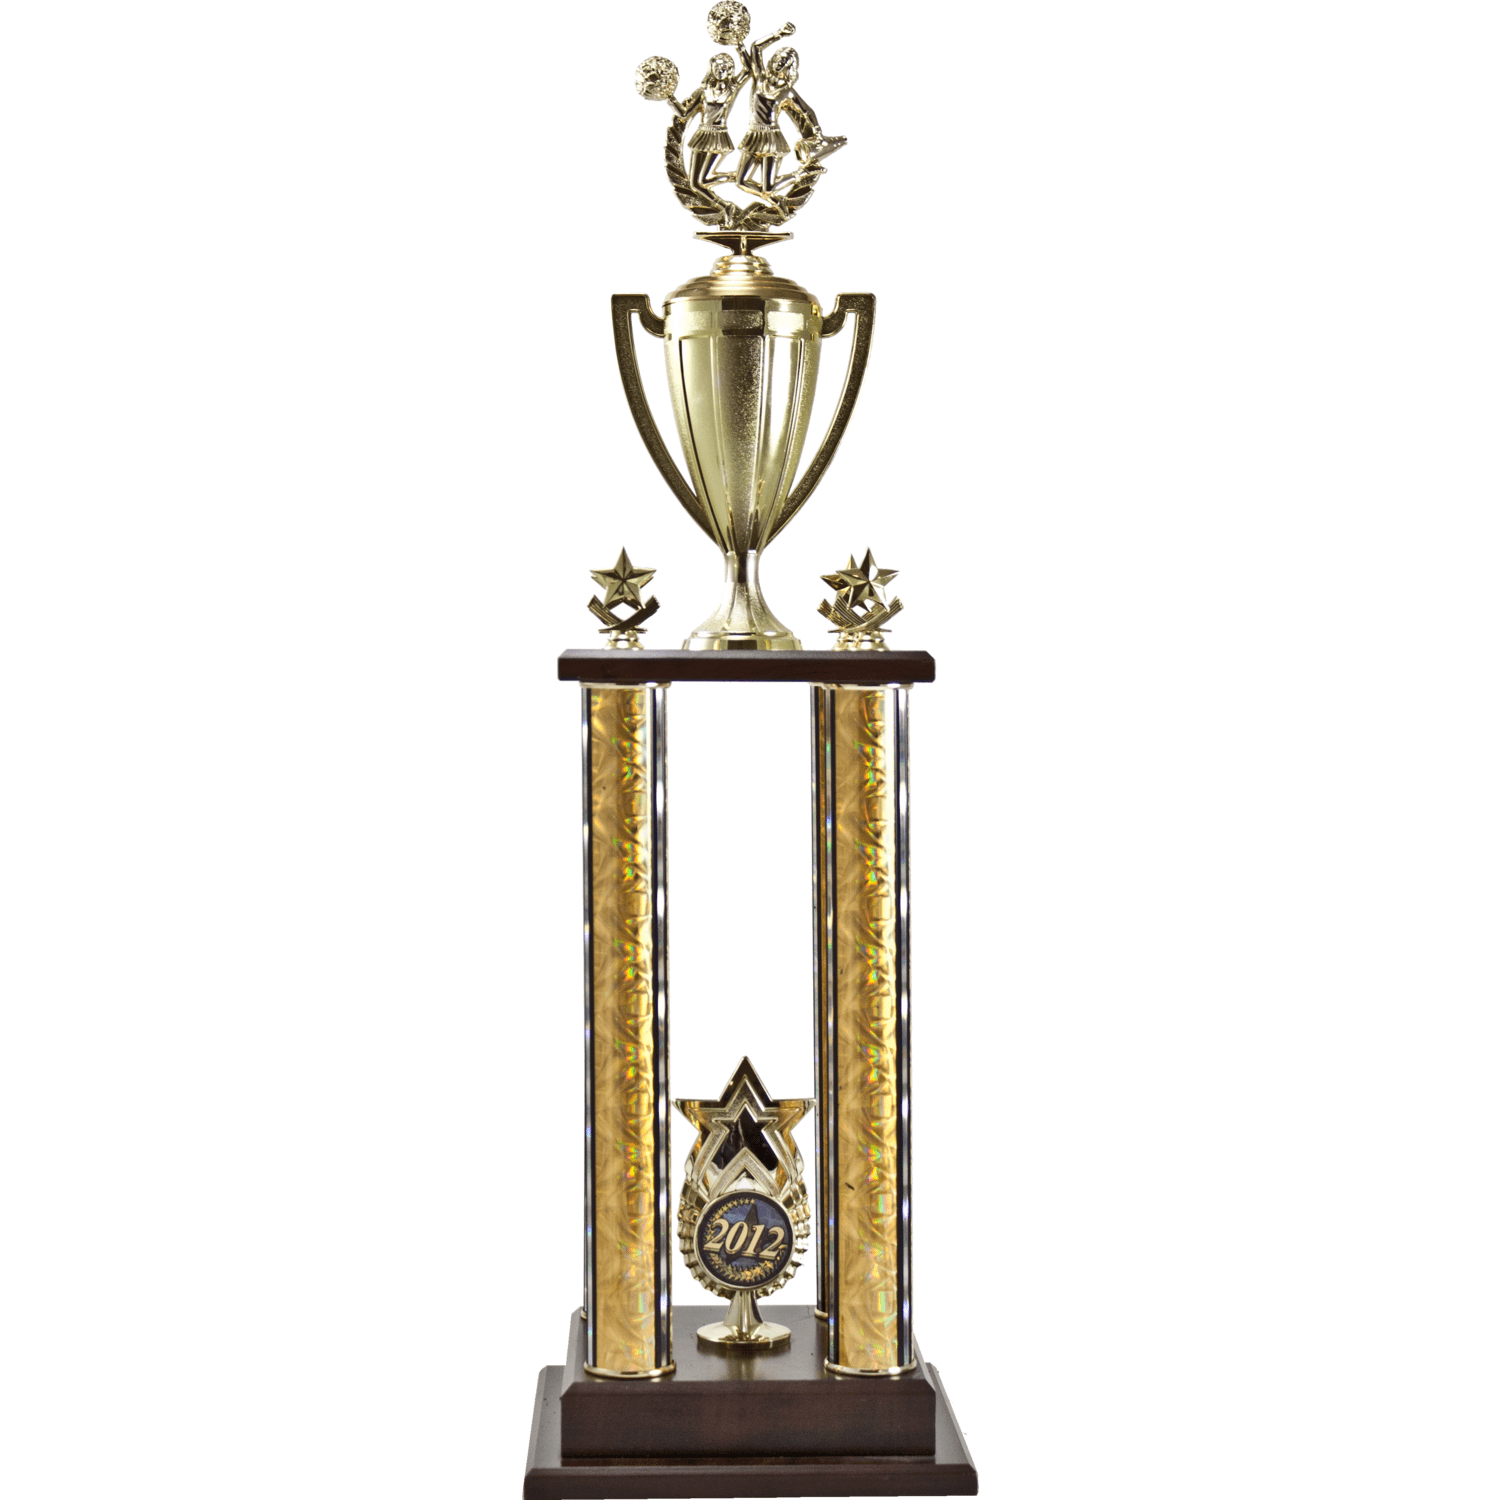 Two-Tier 4 Post Trophy With Star "Exclusive" Star | Alliance Awards LLC.